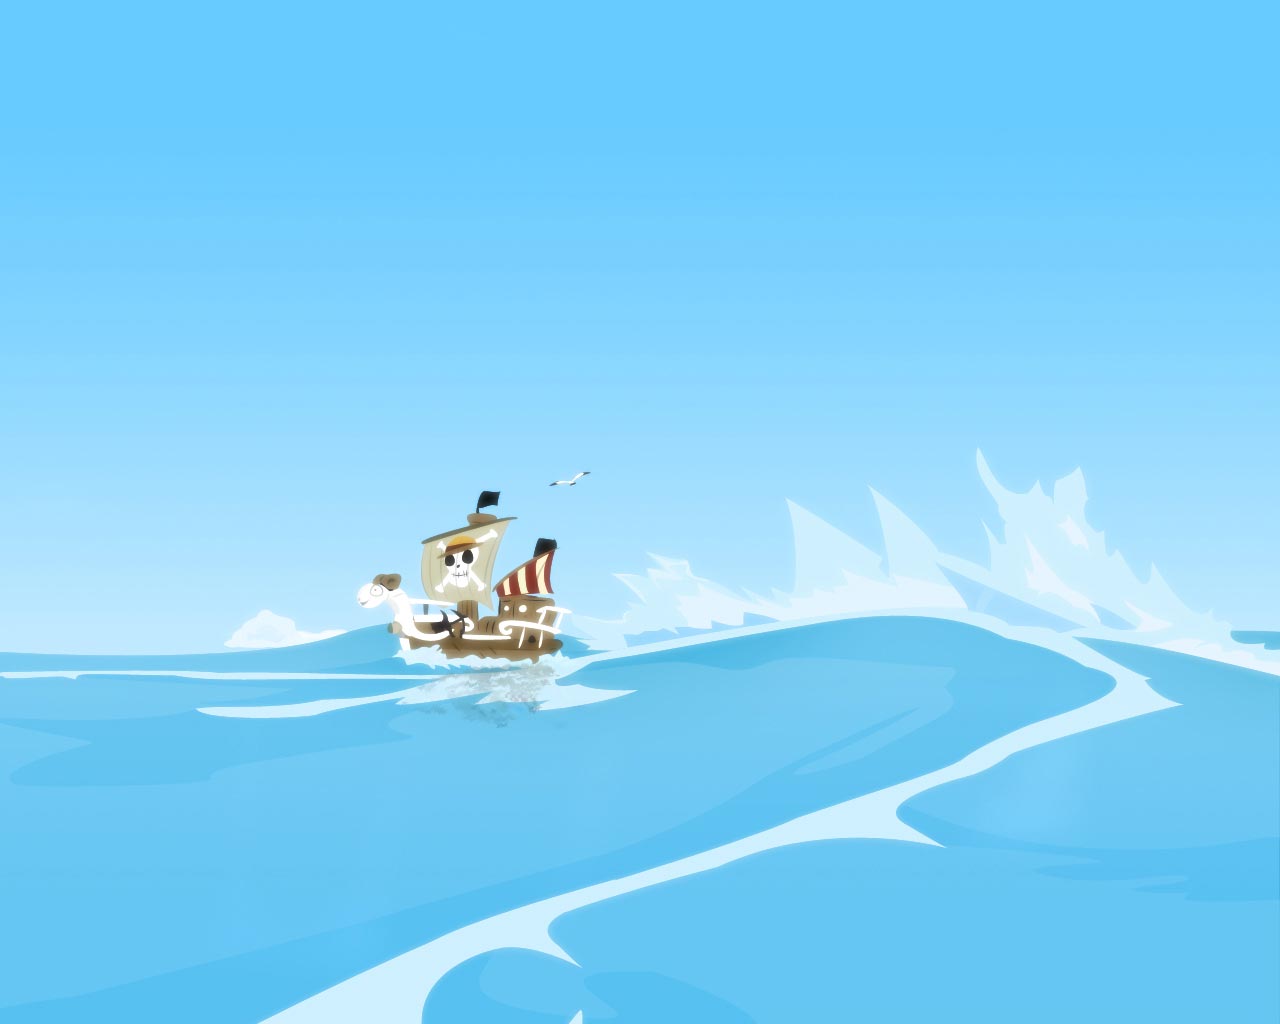 Going Merry (One Piece) wallpapers for desktop, download free